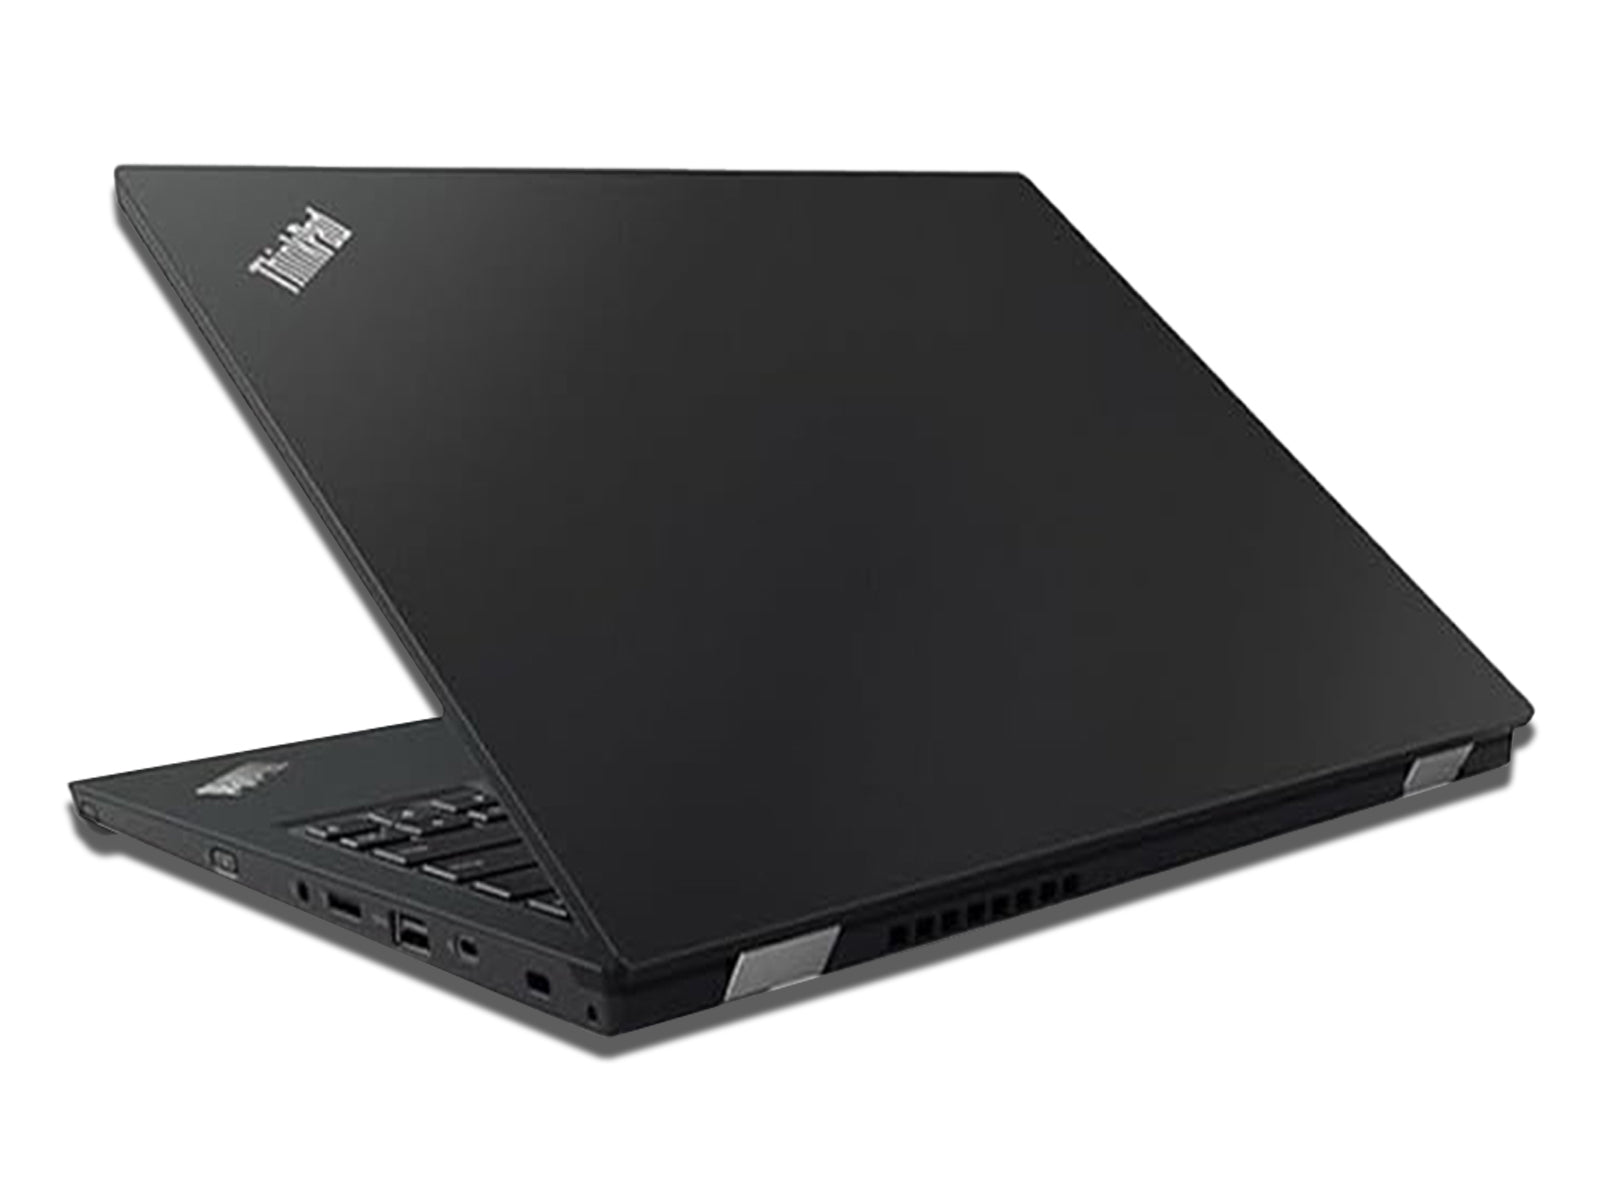 Back View of Partially Open Lenovo L390 Laptop on The White Background